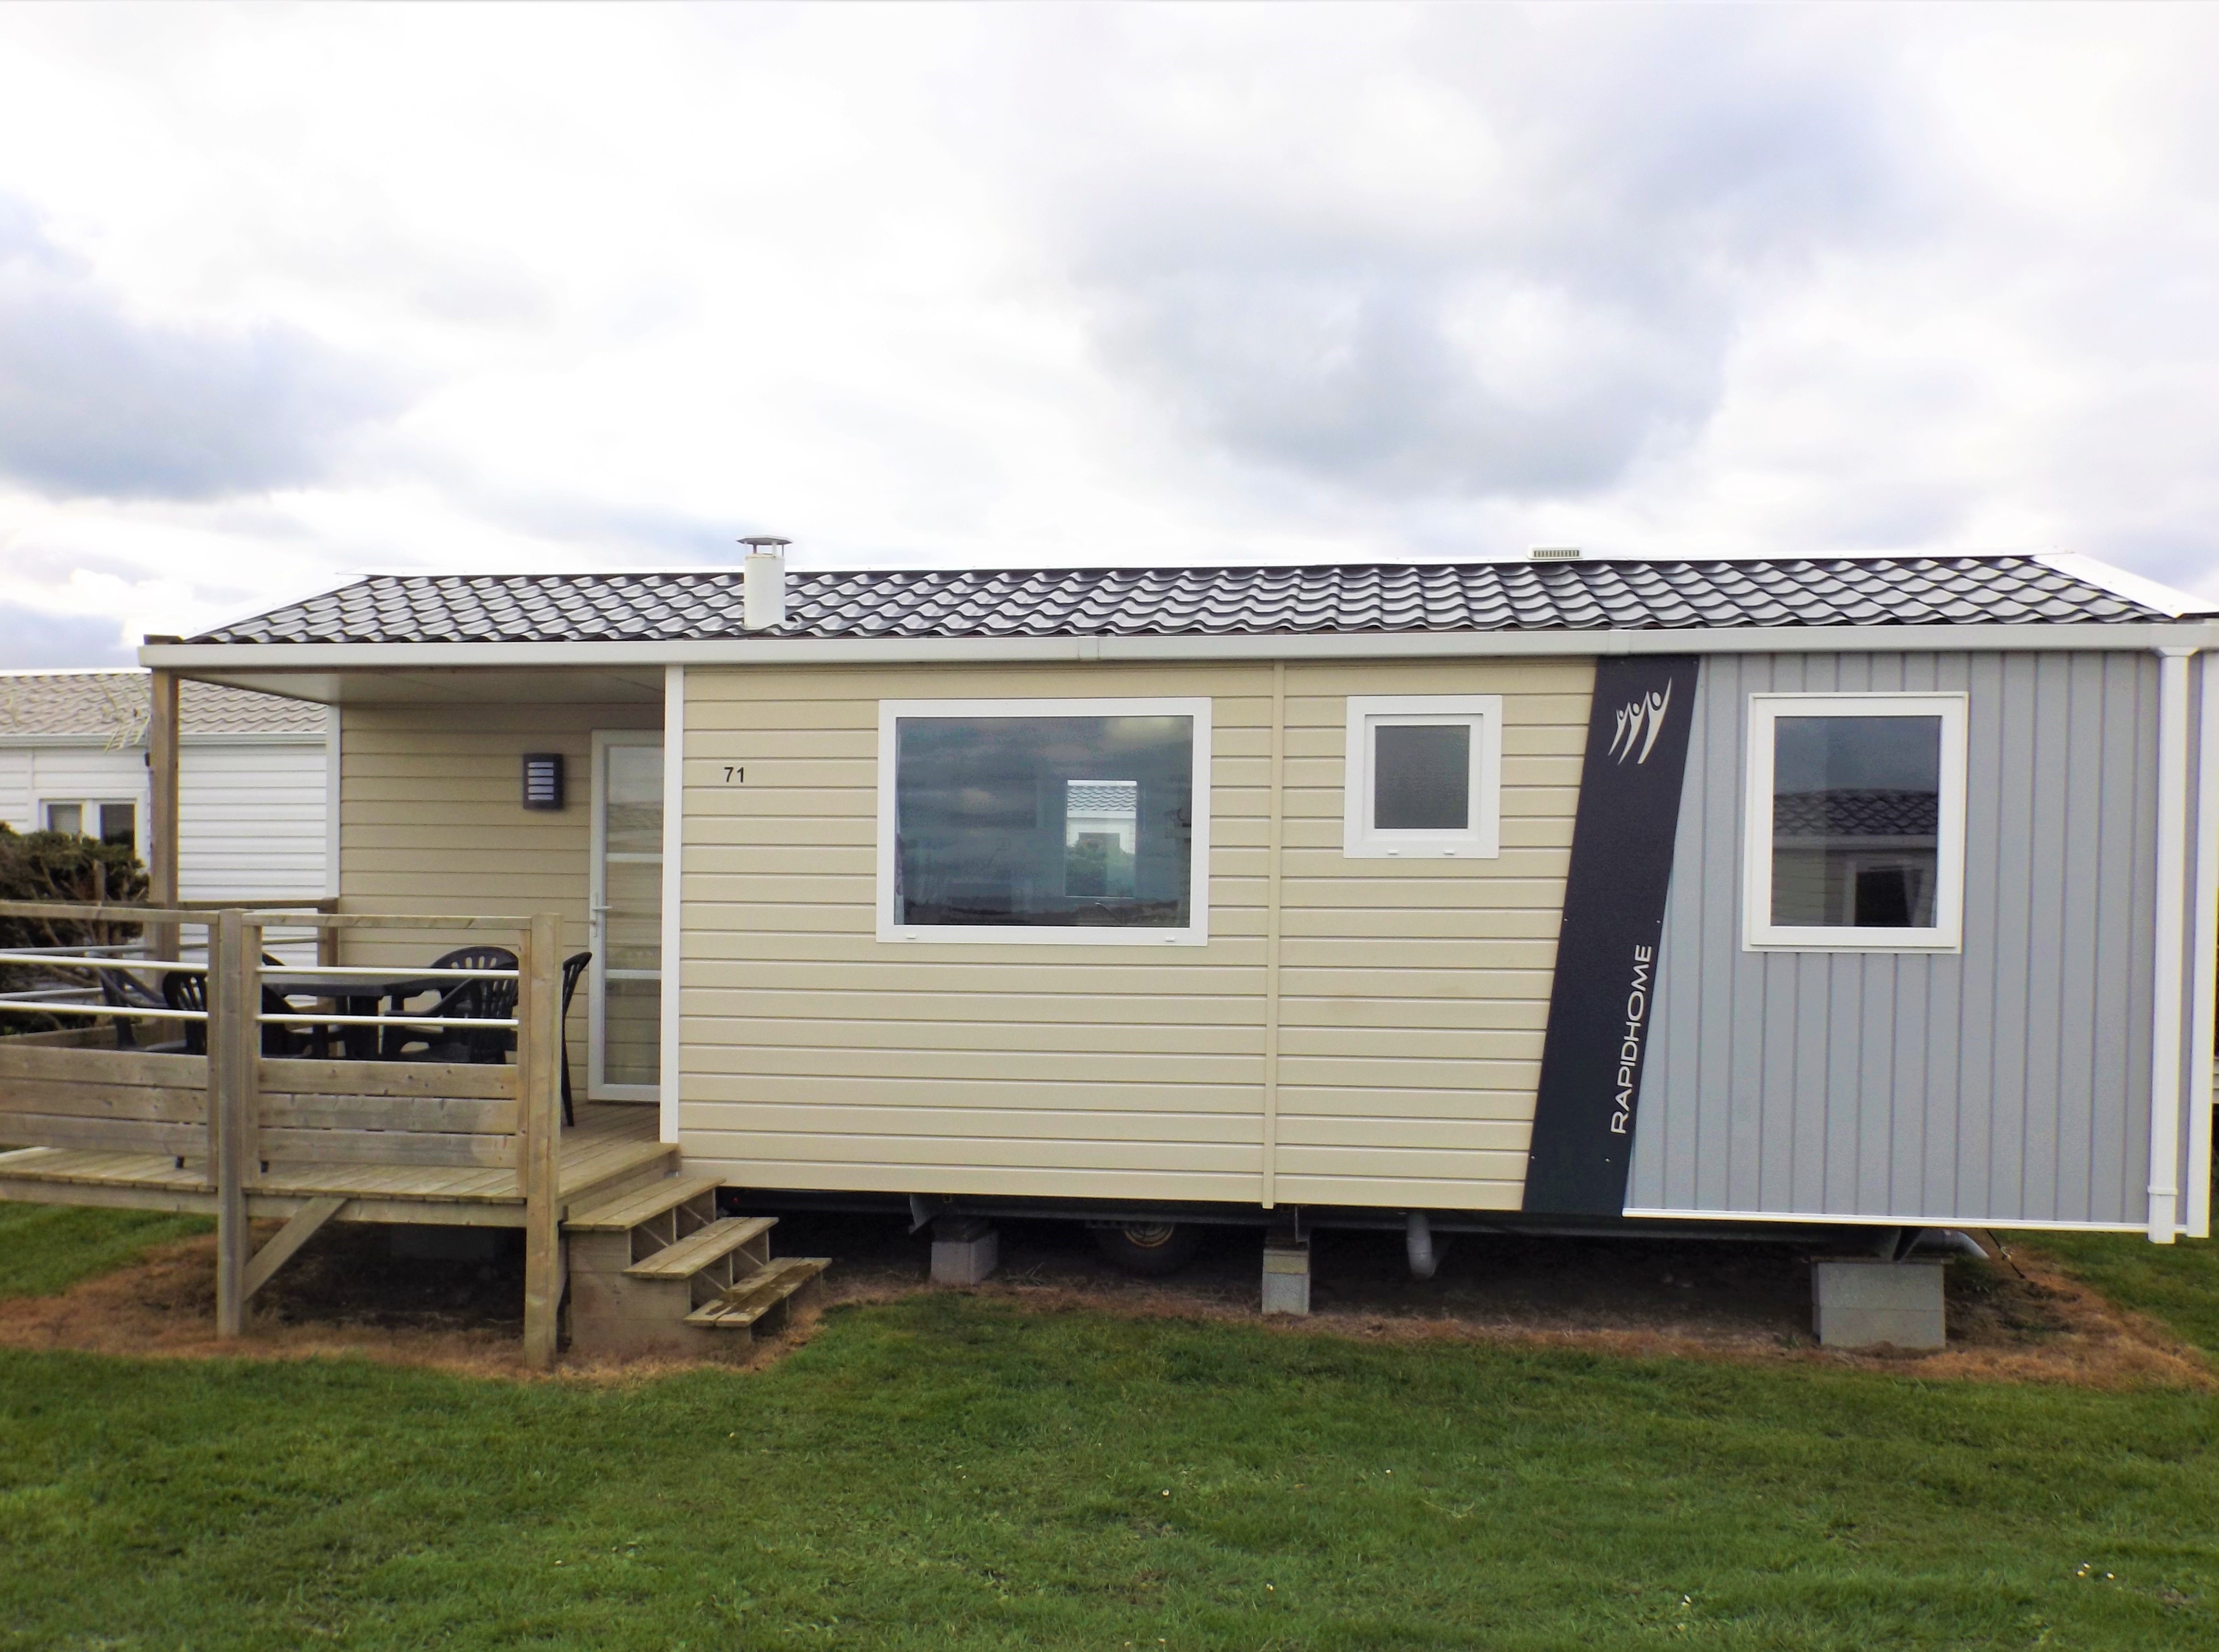 Rapid'home alizée 3 chambres terrasse semi couverte gamme standard camping omaha beach 